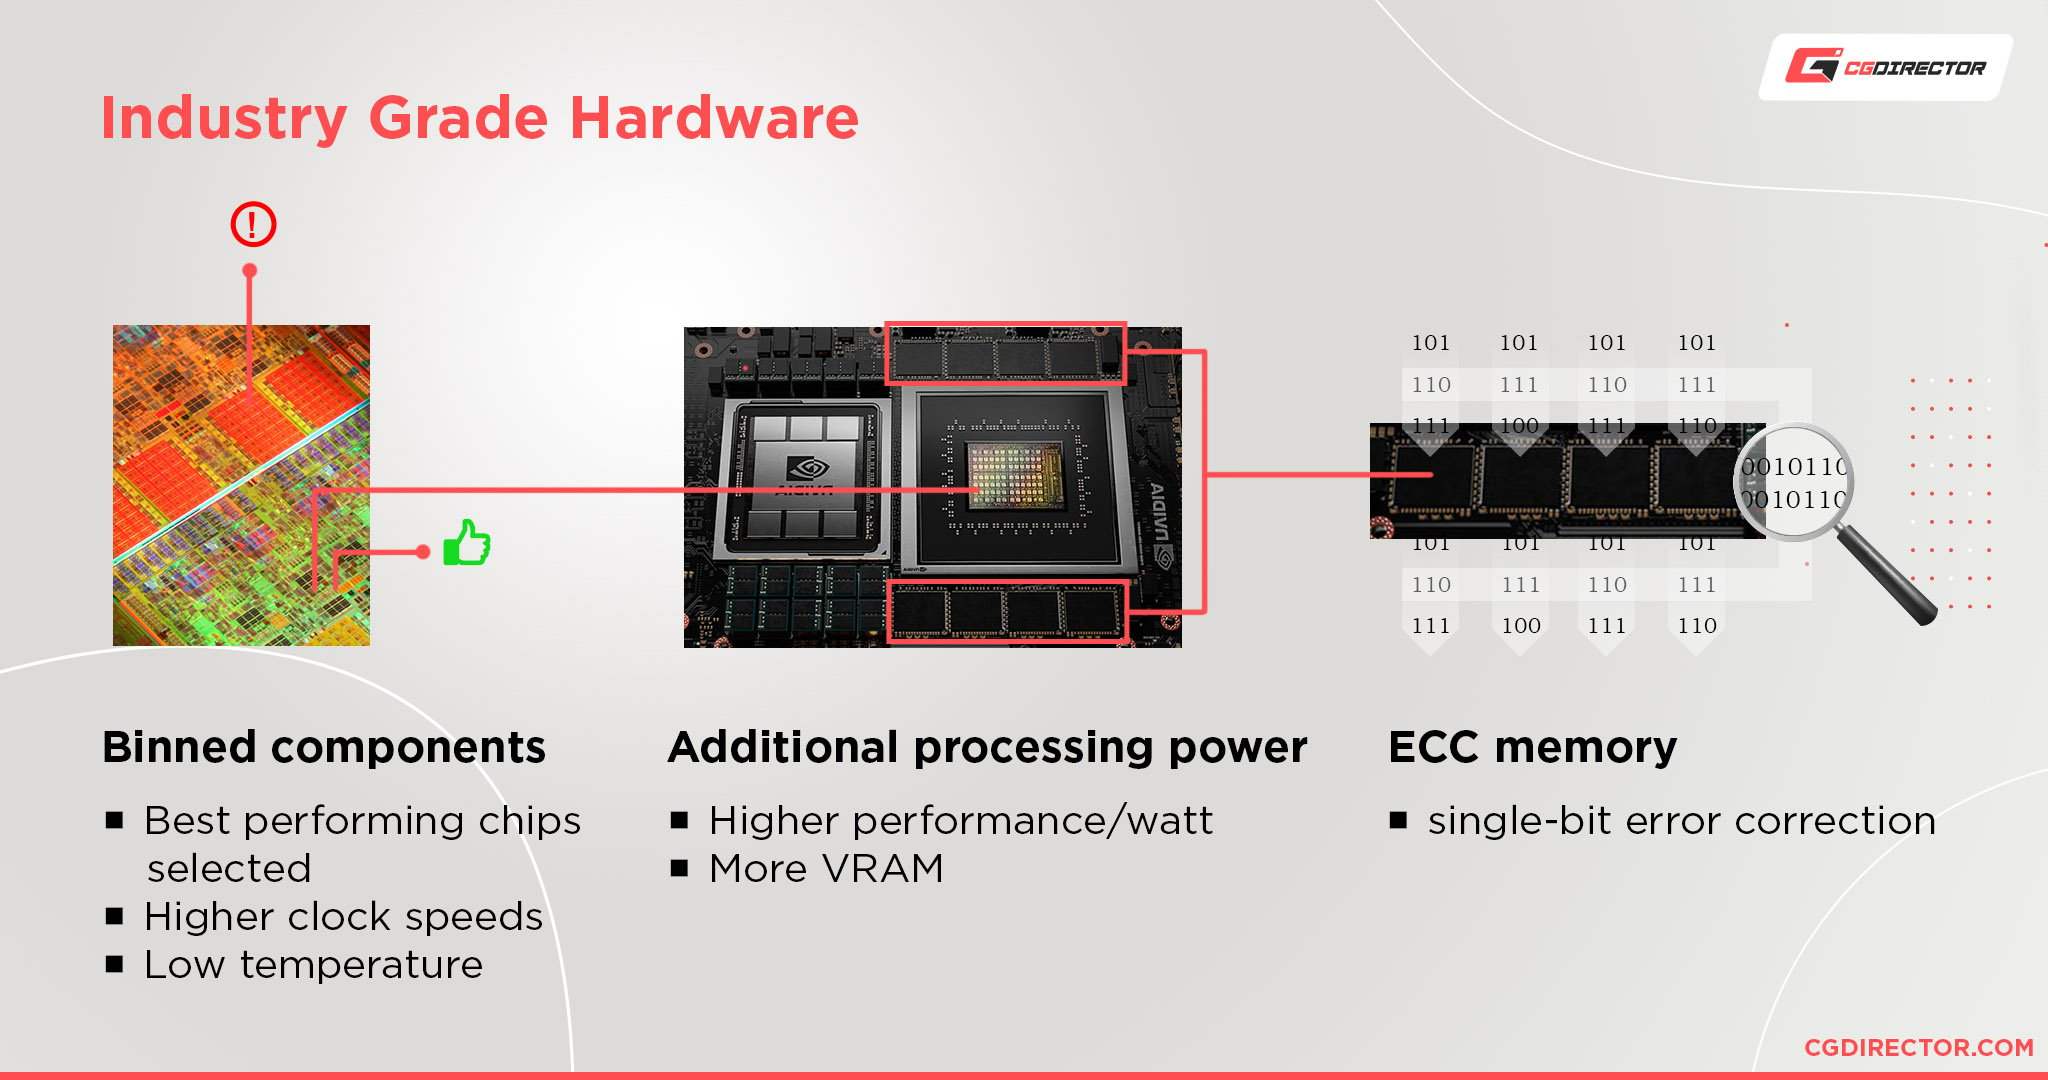 Key features of Industry-grade Hardware